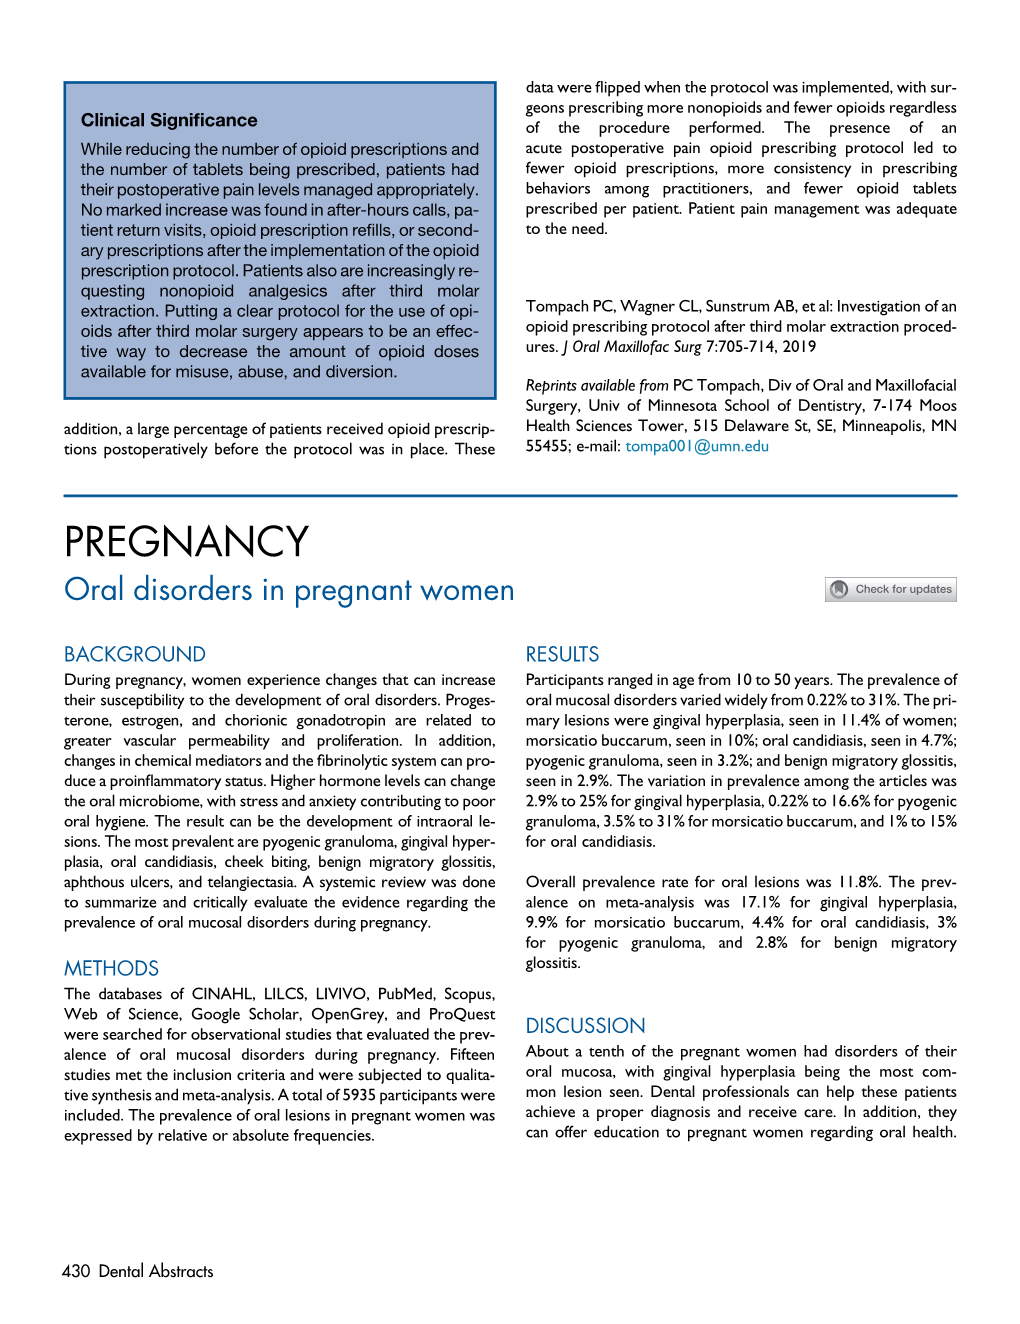 Oral Disorders in Pregnant Women